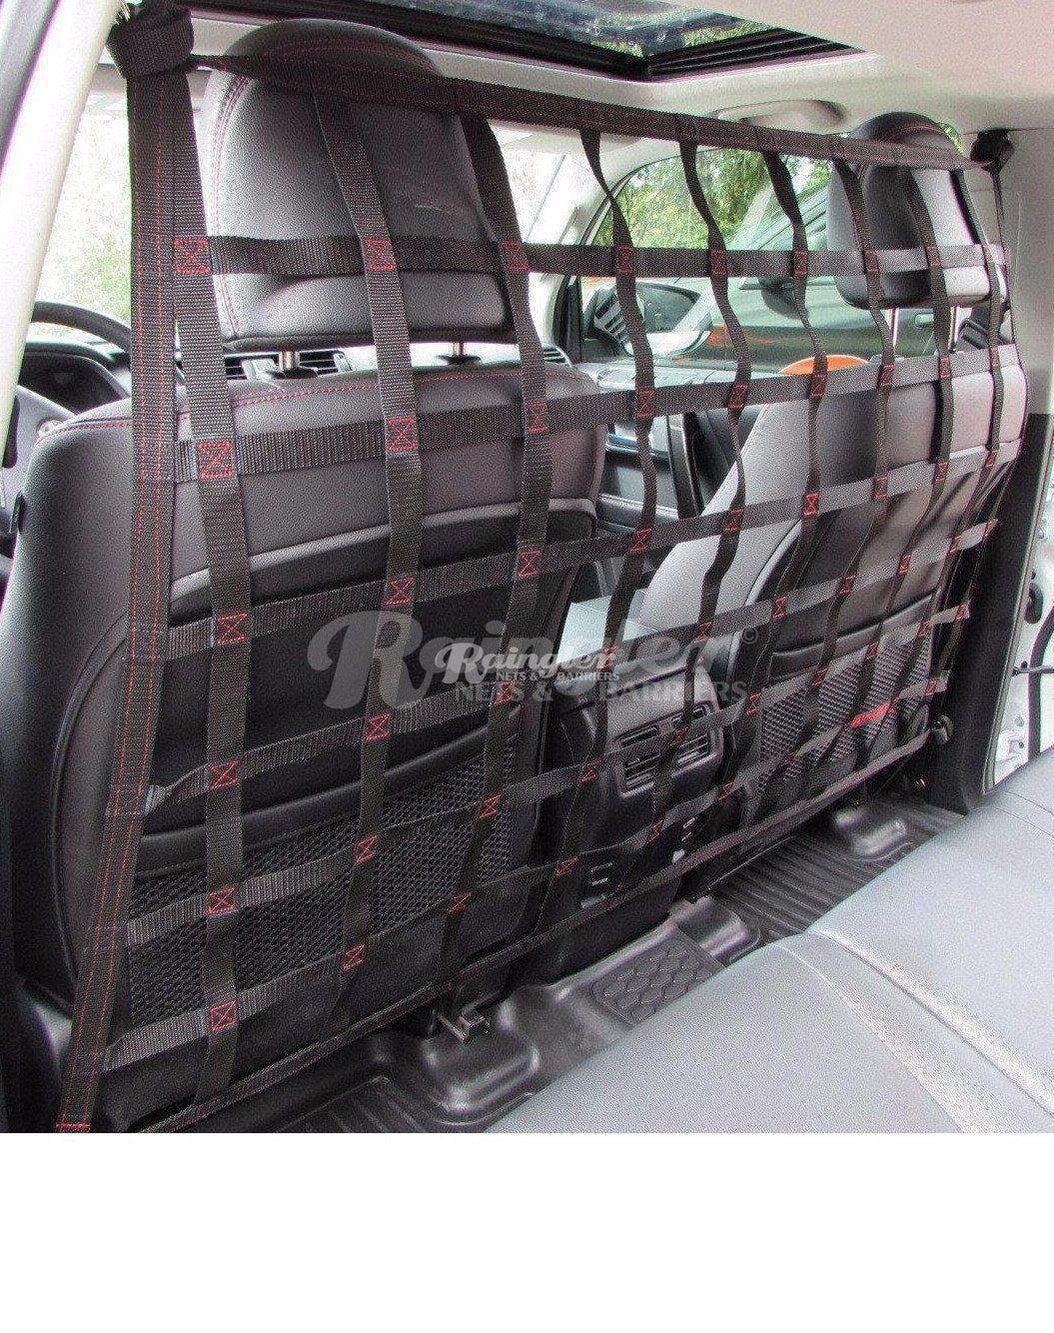 2015 - Newer Toyota Hilux Dual Cab Behind Front Seats Barrier Divider Net